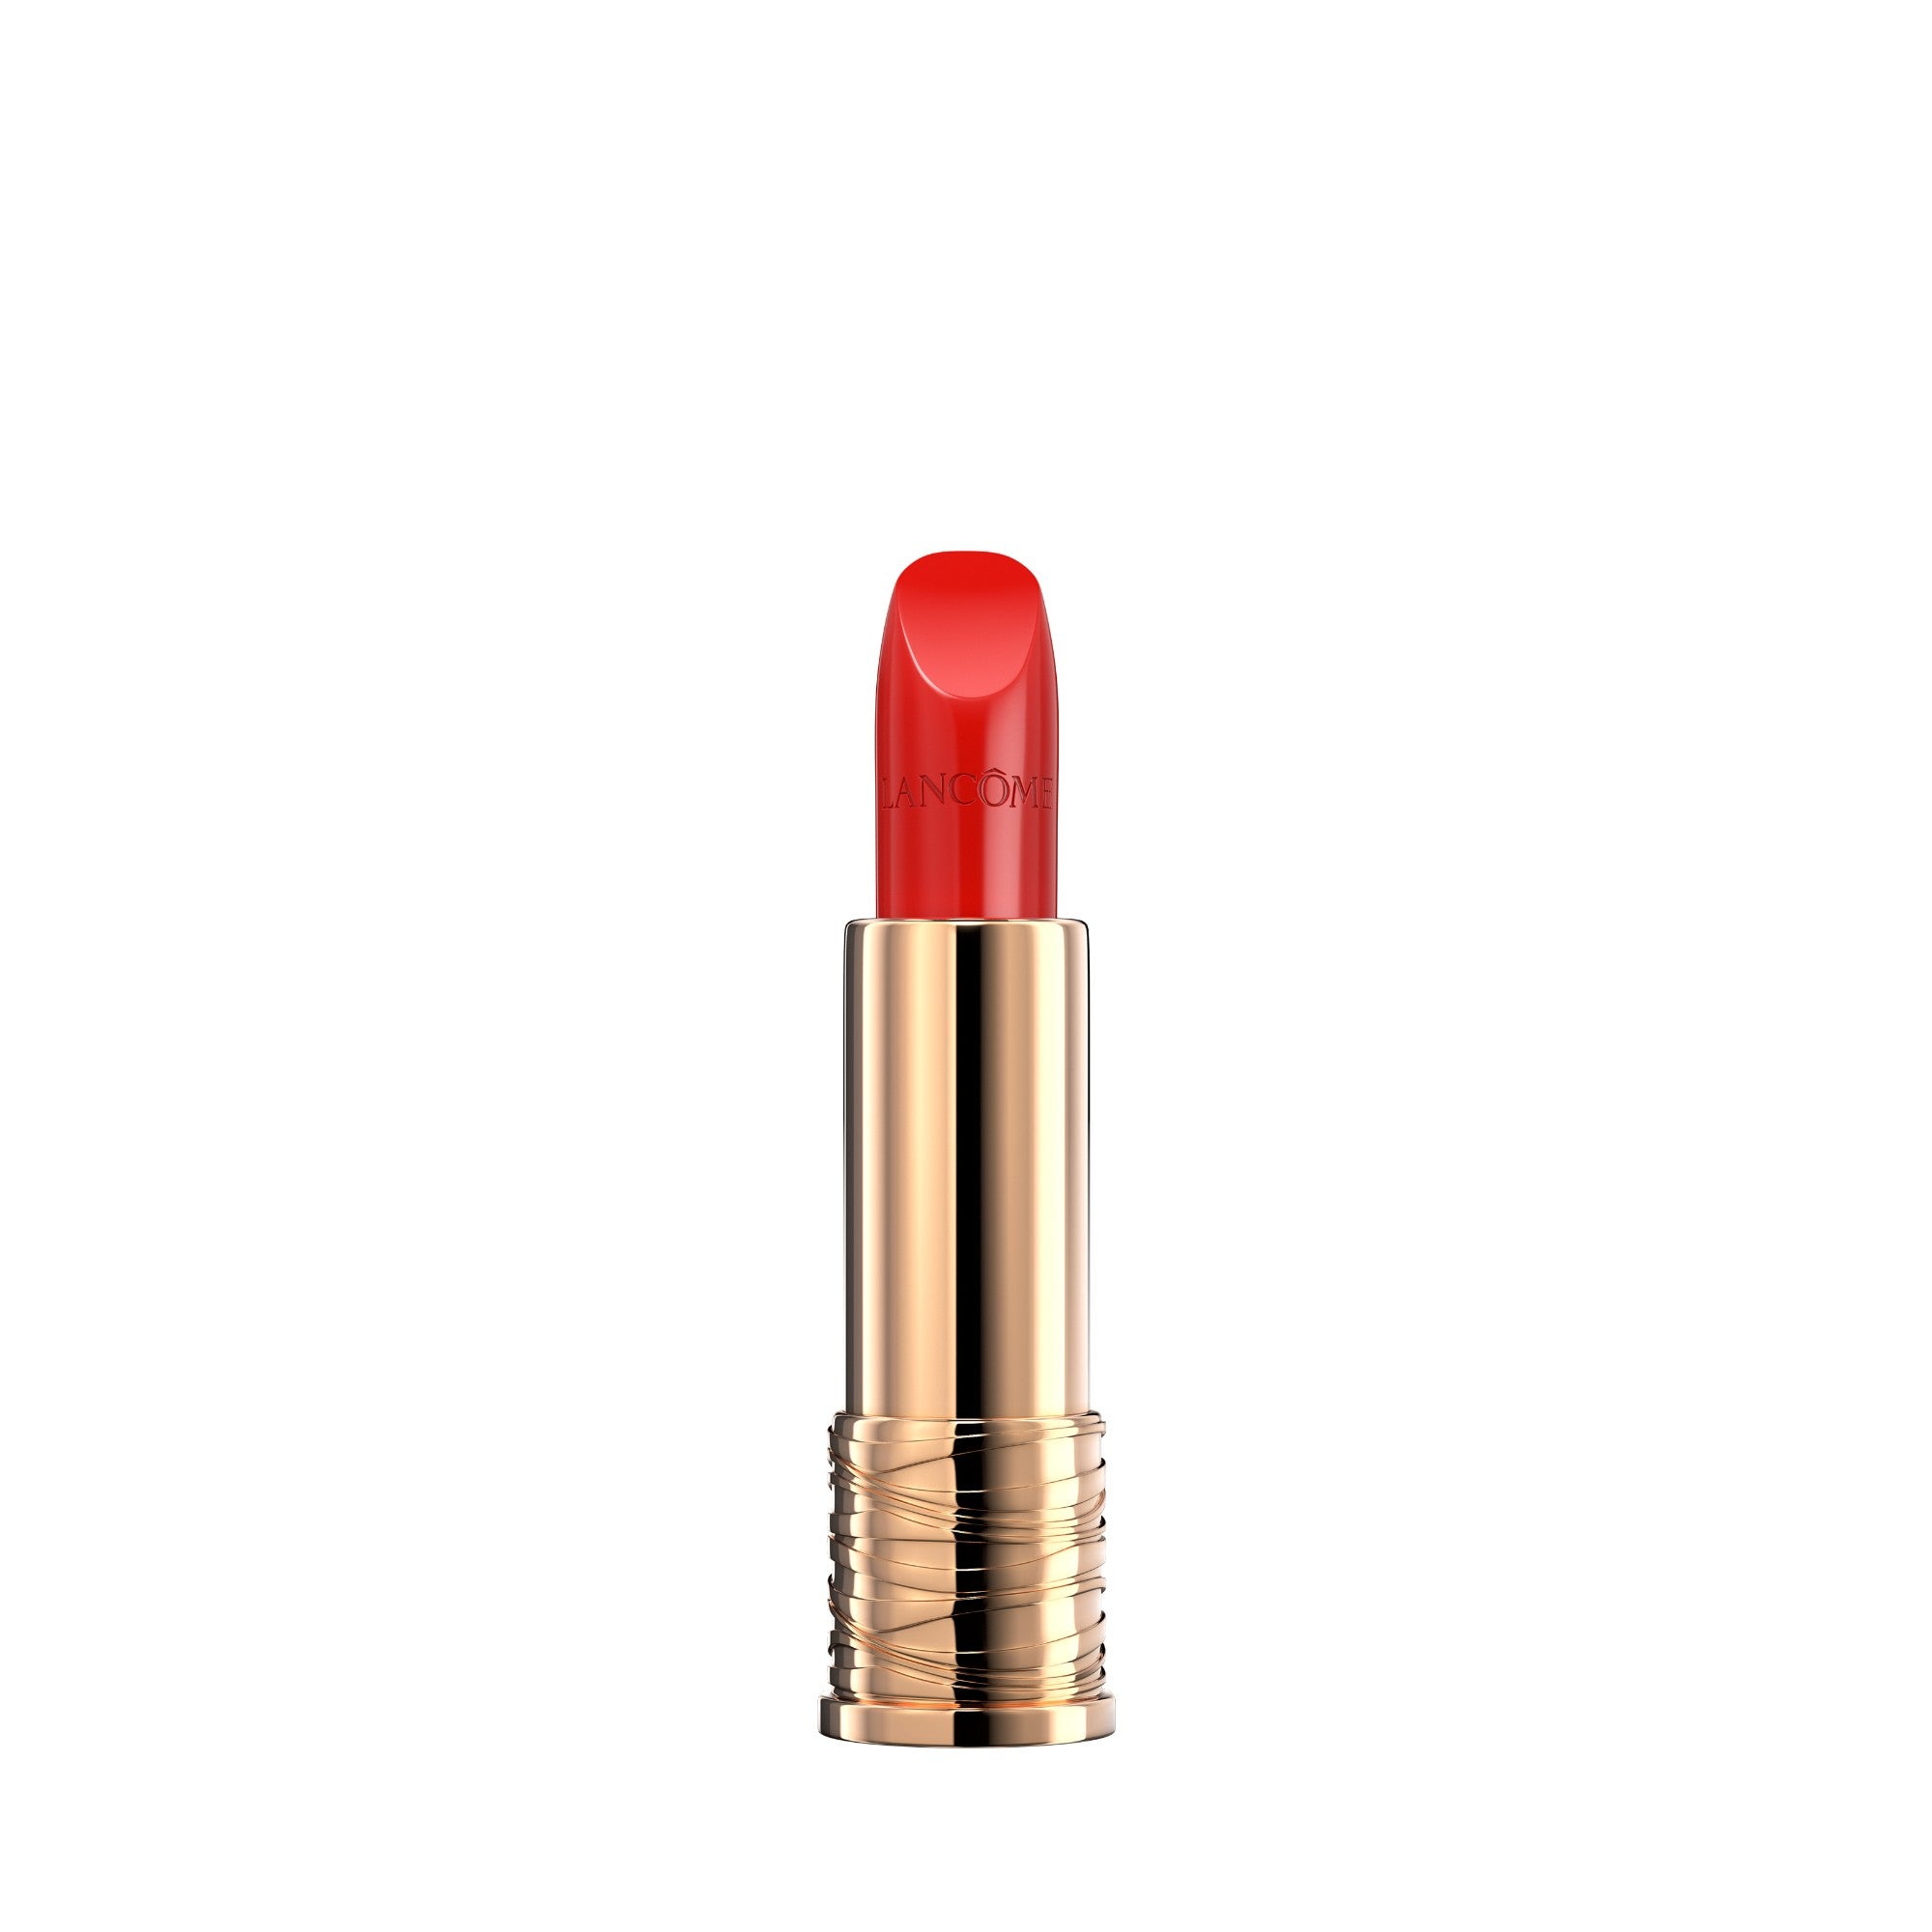 Lancome Absolu Rouge Cream Lipstick Rouge Flamboyant Only